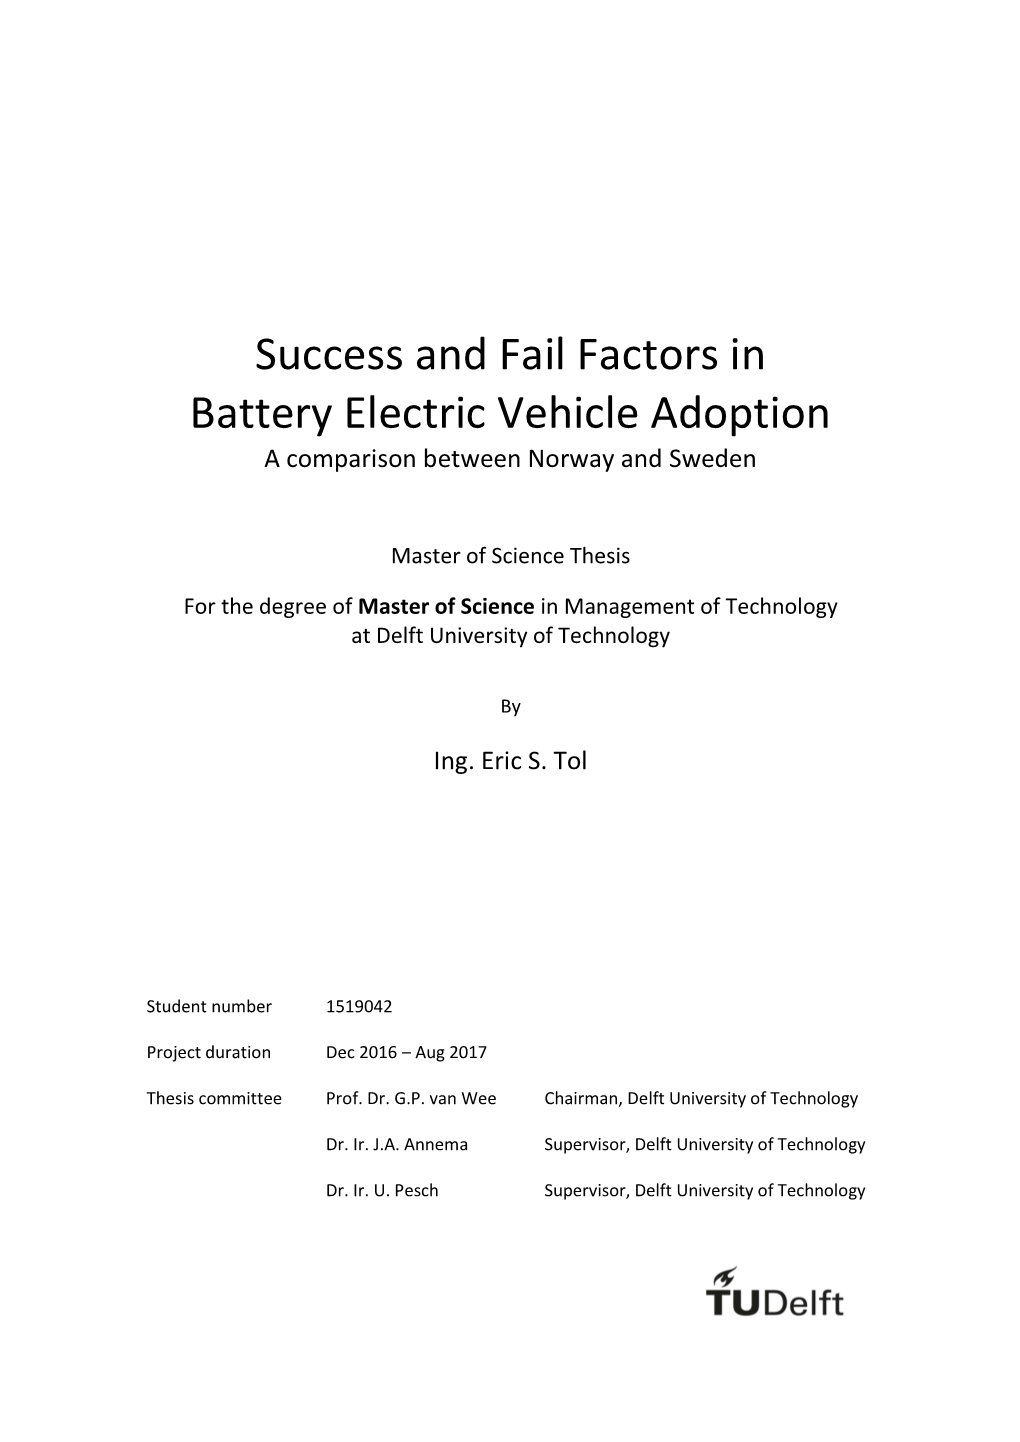 Success and Fail Factors in Battery Electric Vehicle Adoption a